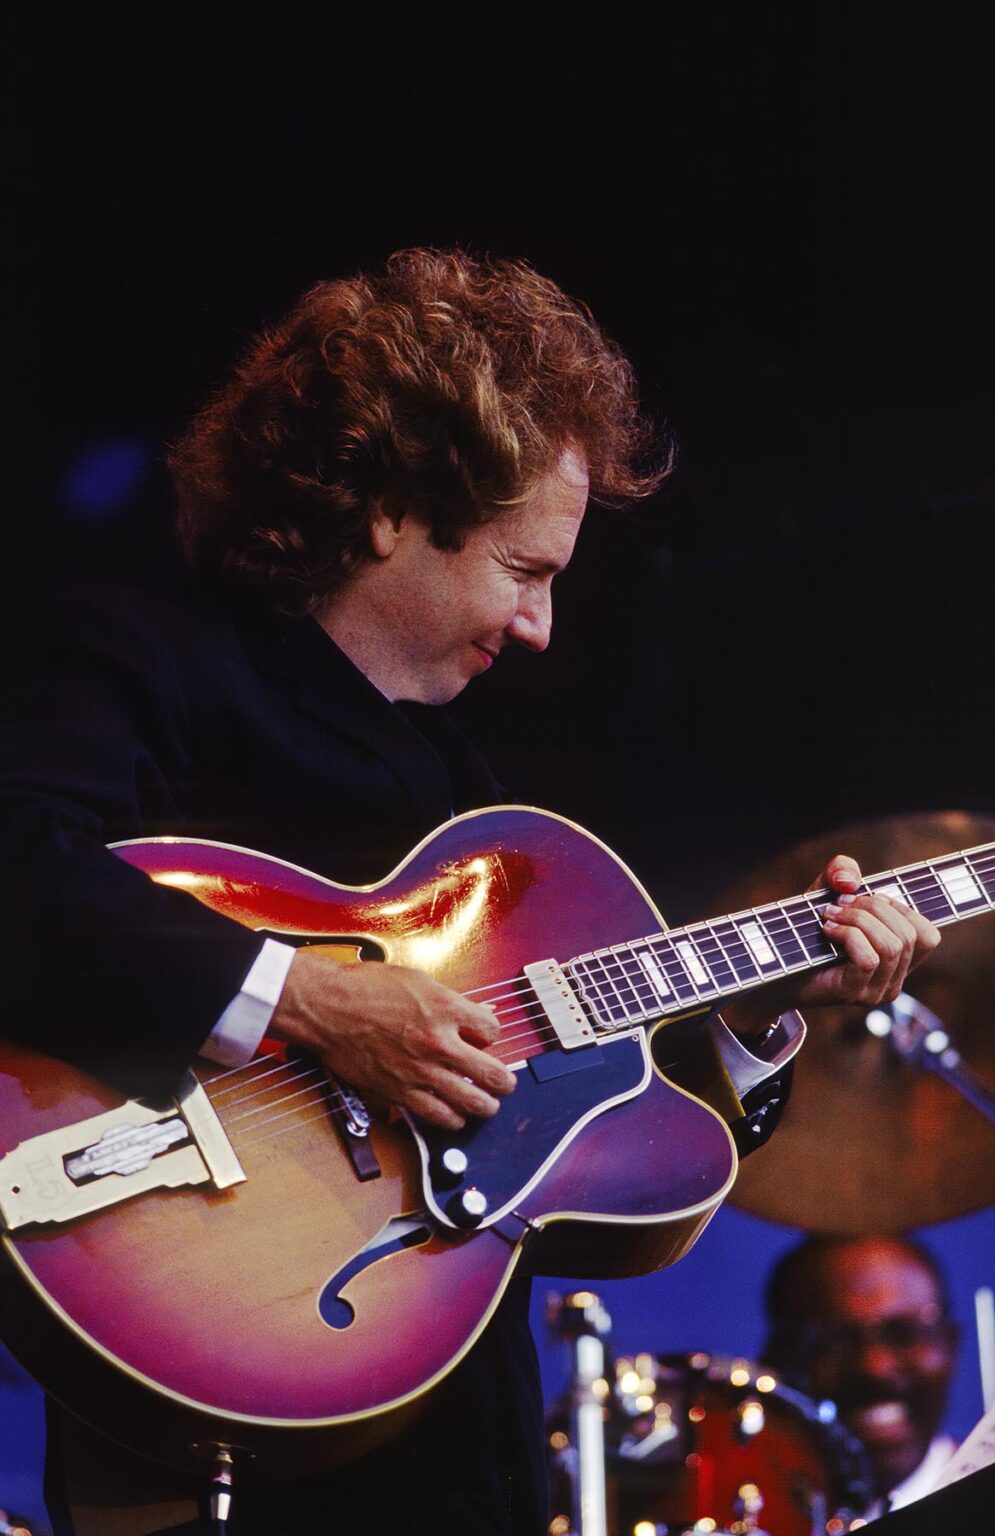 LEE RITENOUR plays GUITAR with FOURPLAY at the MONTEREY JAZZ FESTIVAL - CALIFORNIA